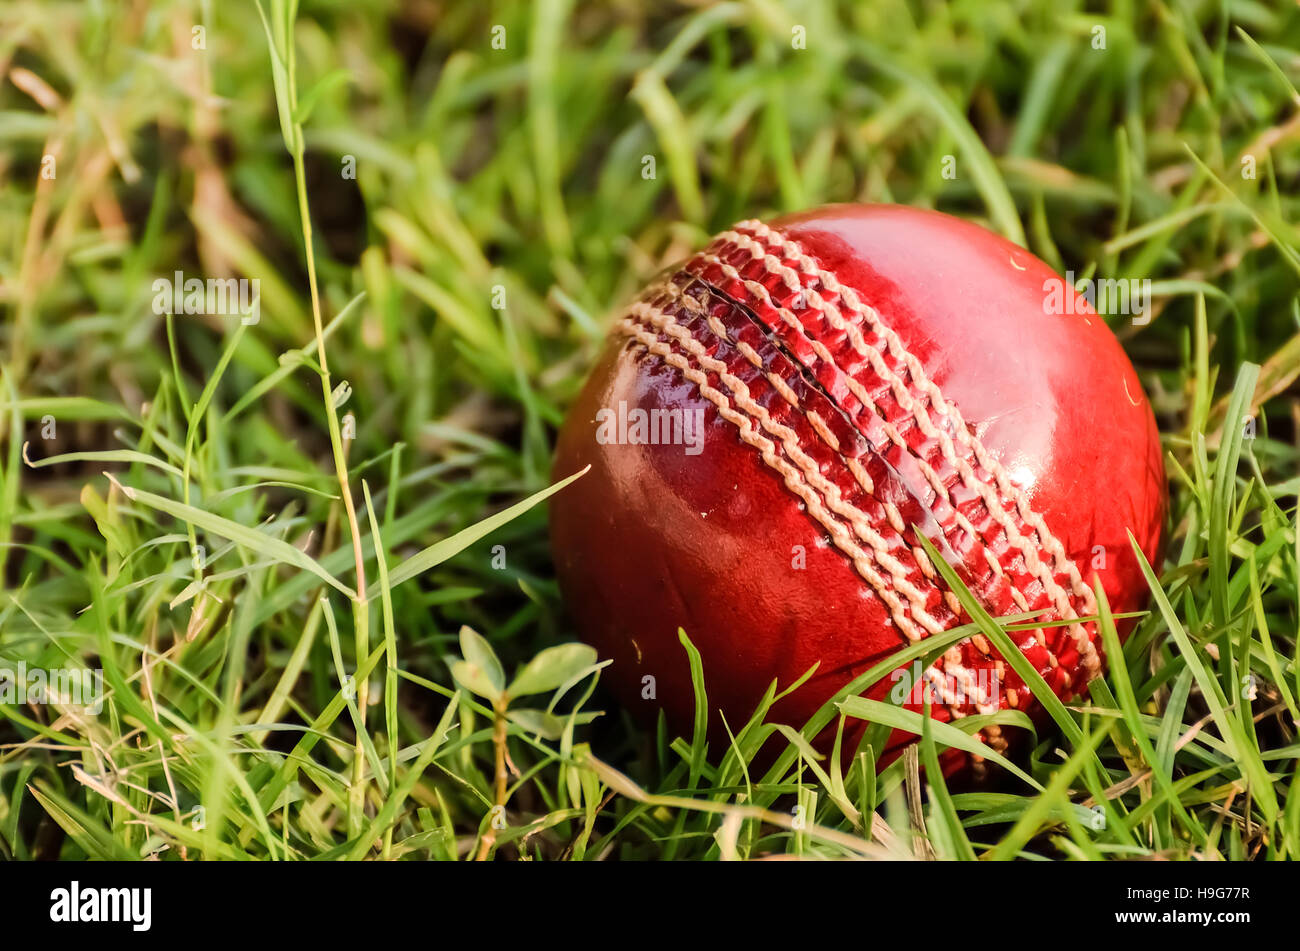 Red leather cricket ball on grass Stock Photo